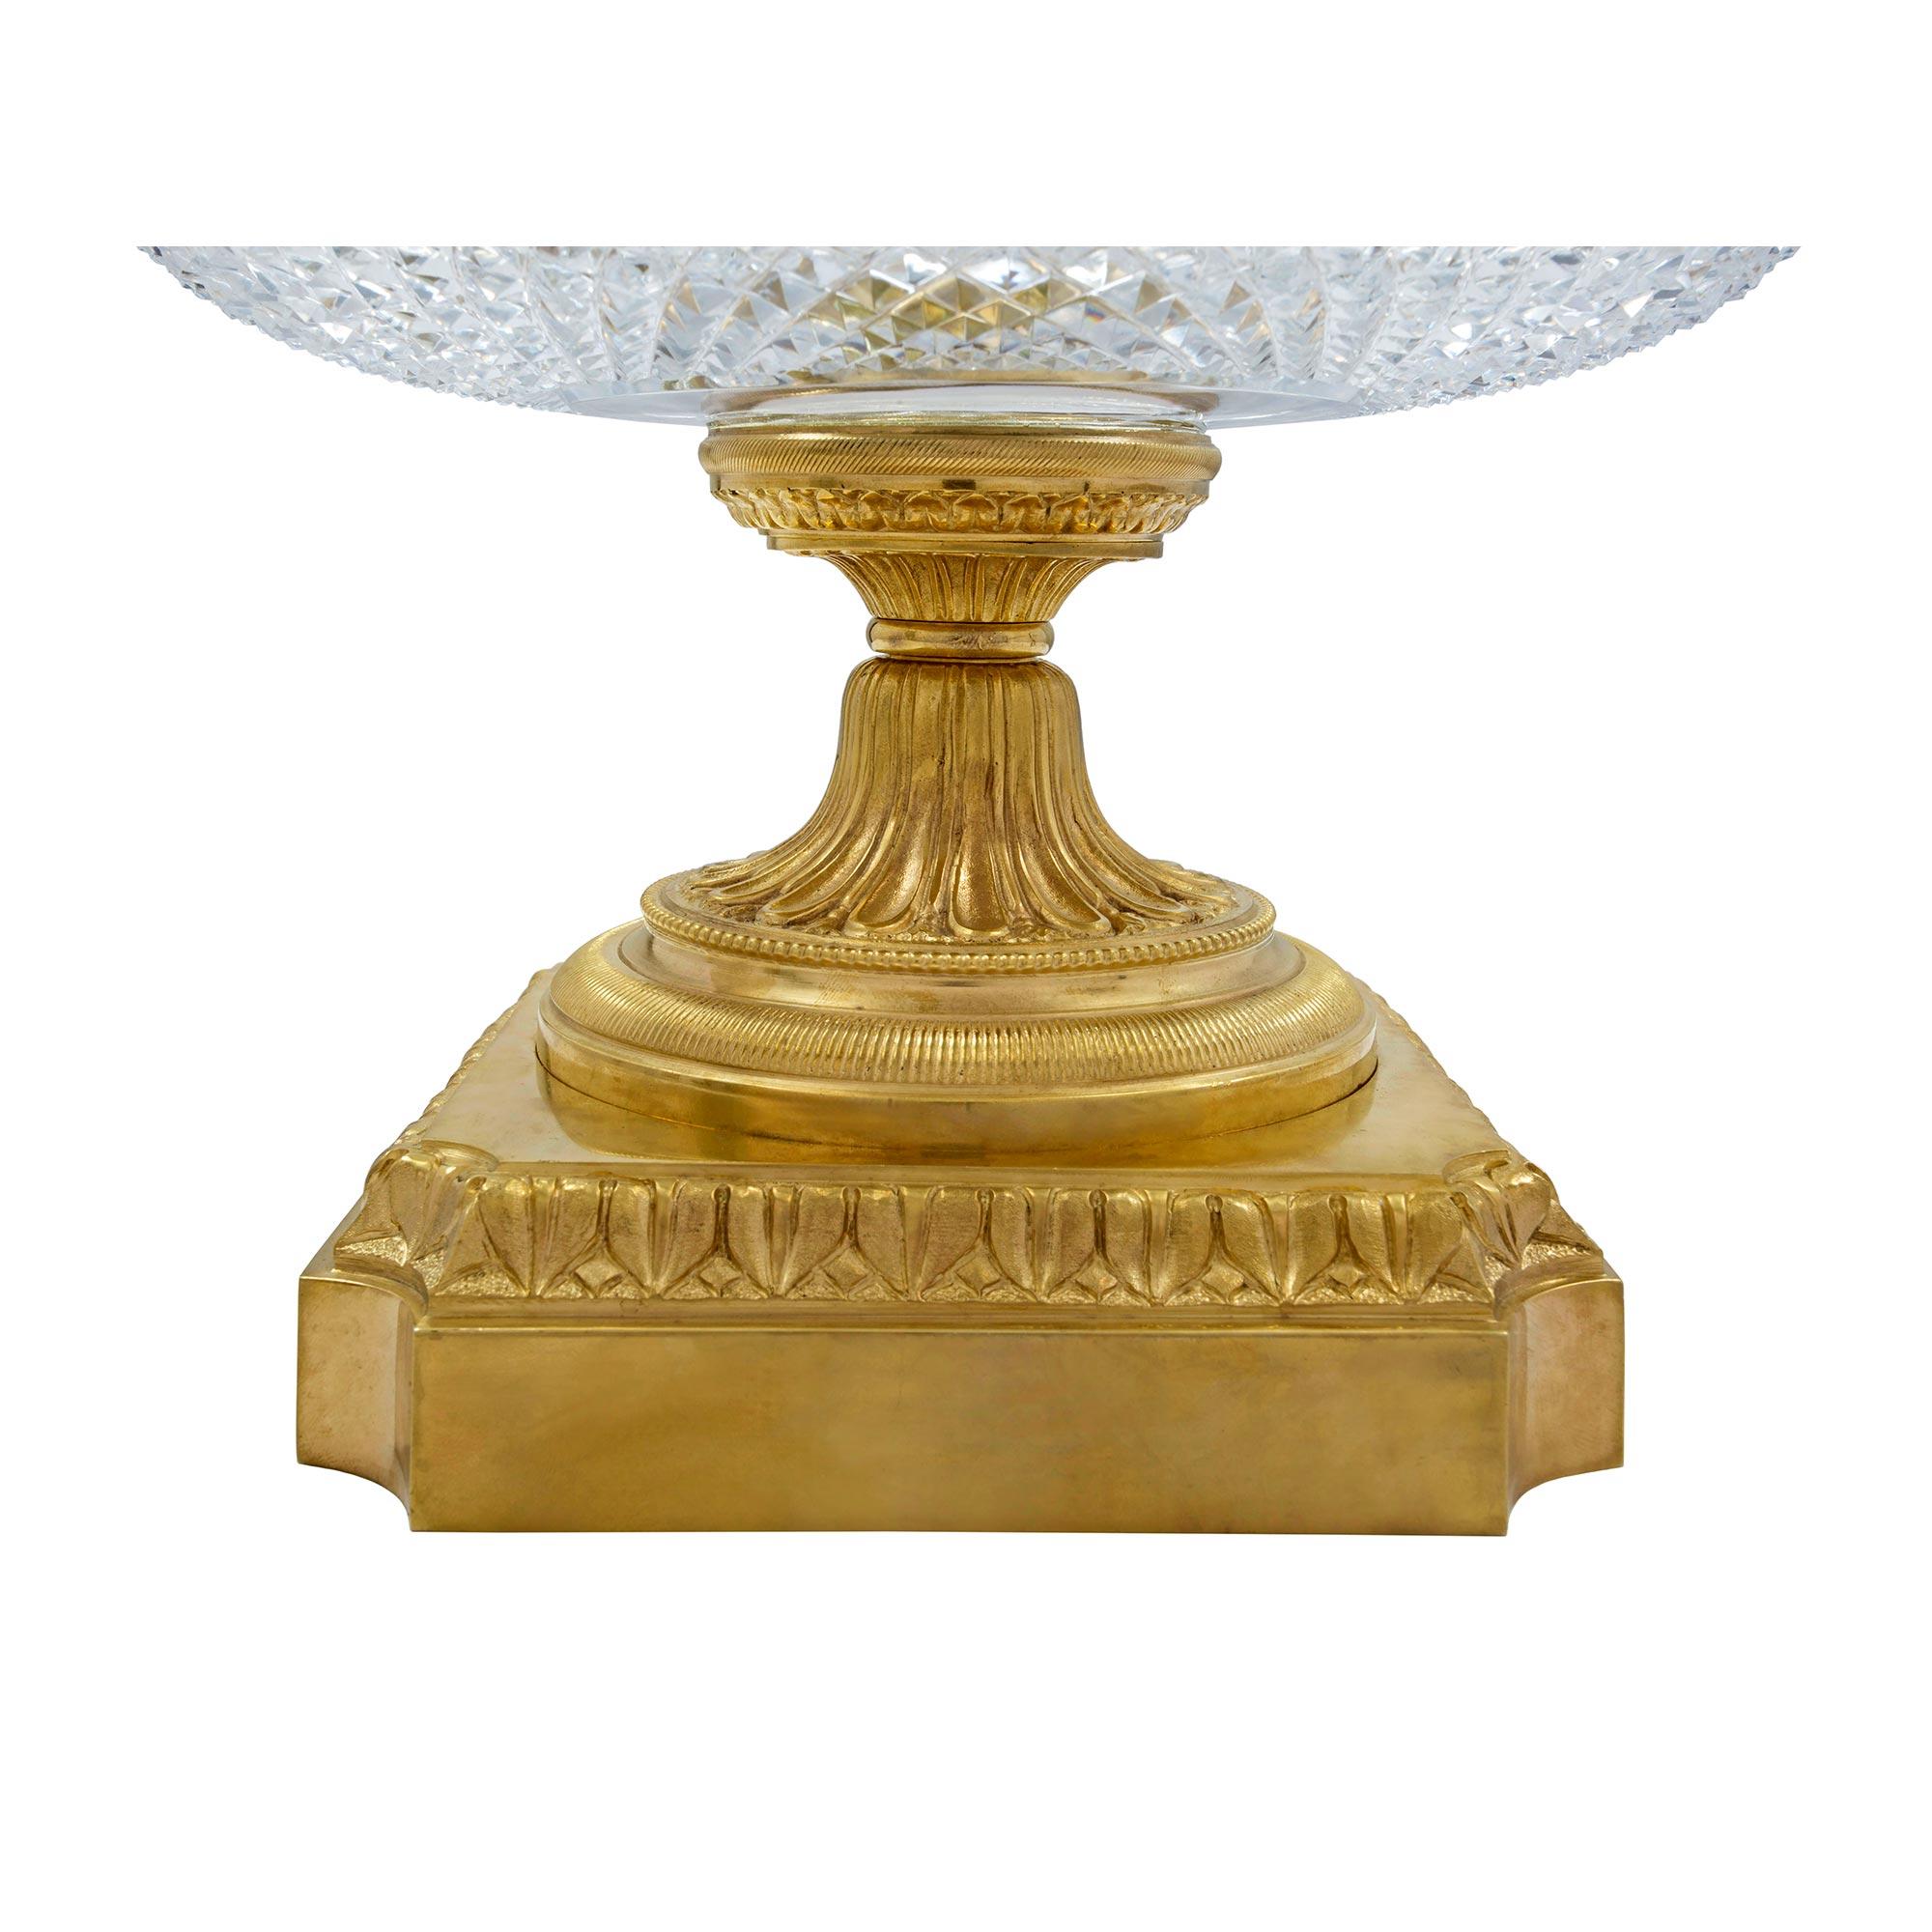 French Mid-19th Century Louis XVI Style Baccarat Crystal and Ormolu Centerpiece For Sale 7